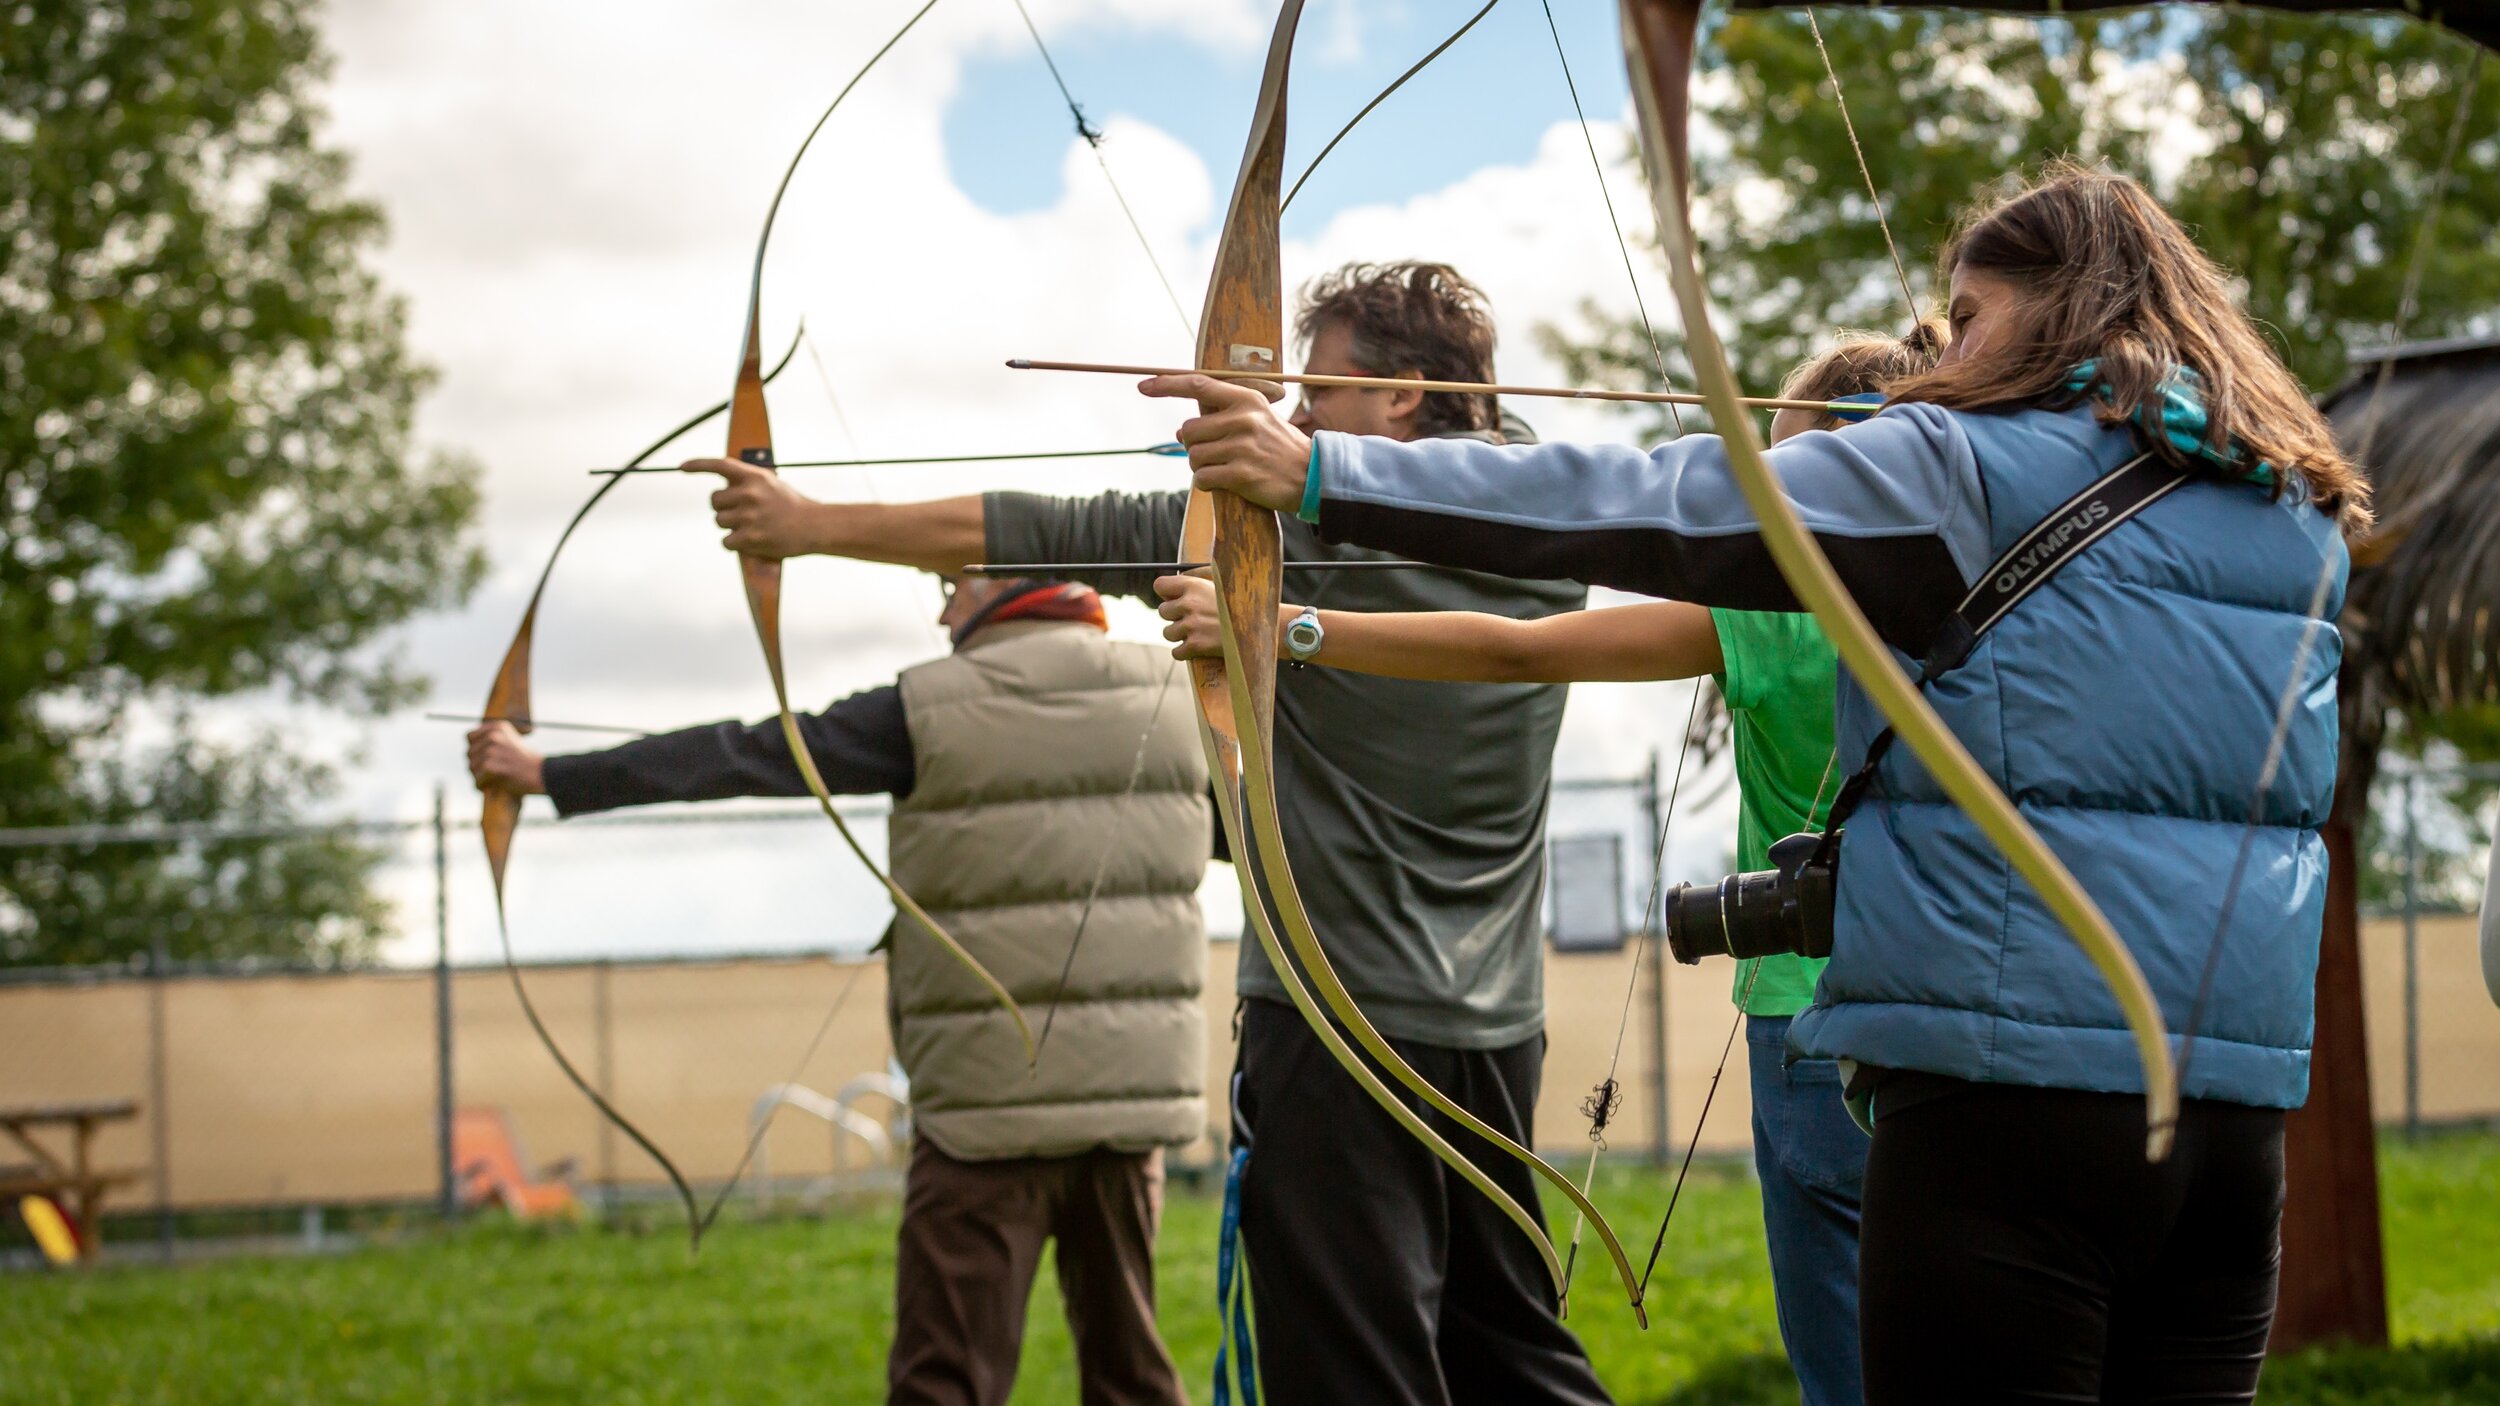 Archery, one of many activites offered at Emirates One&amp;Only Wolgan Valley Resort